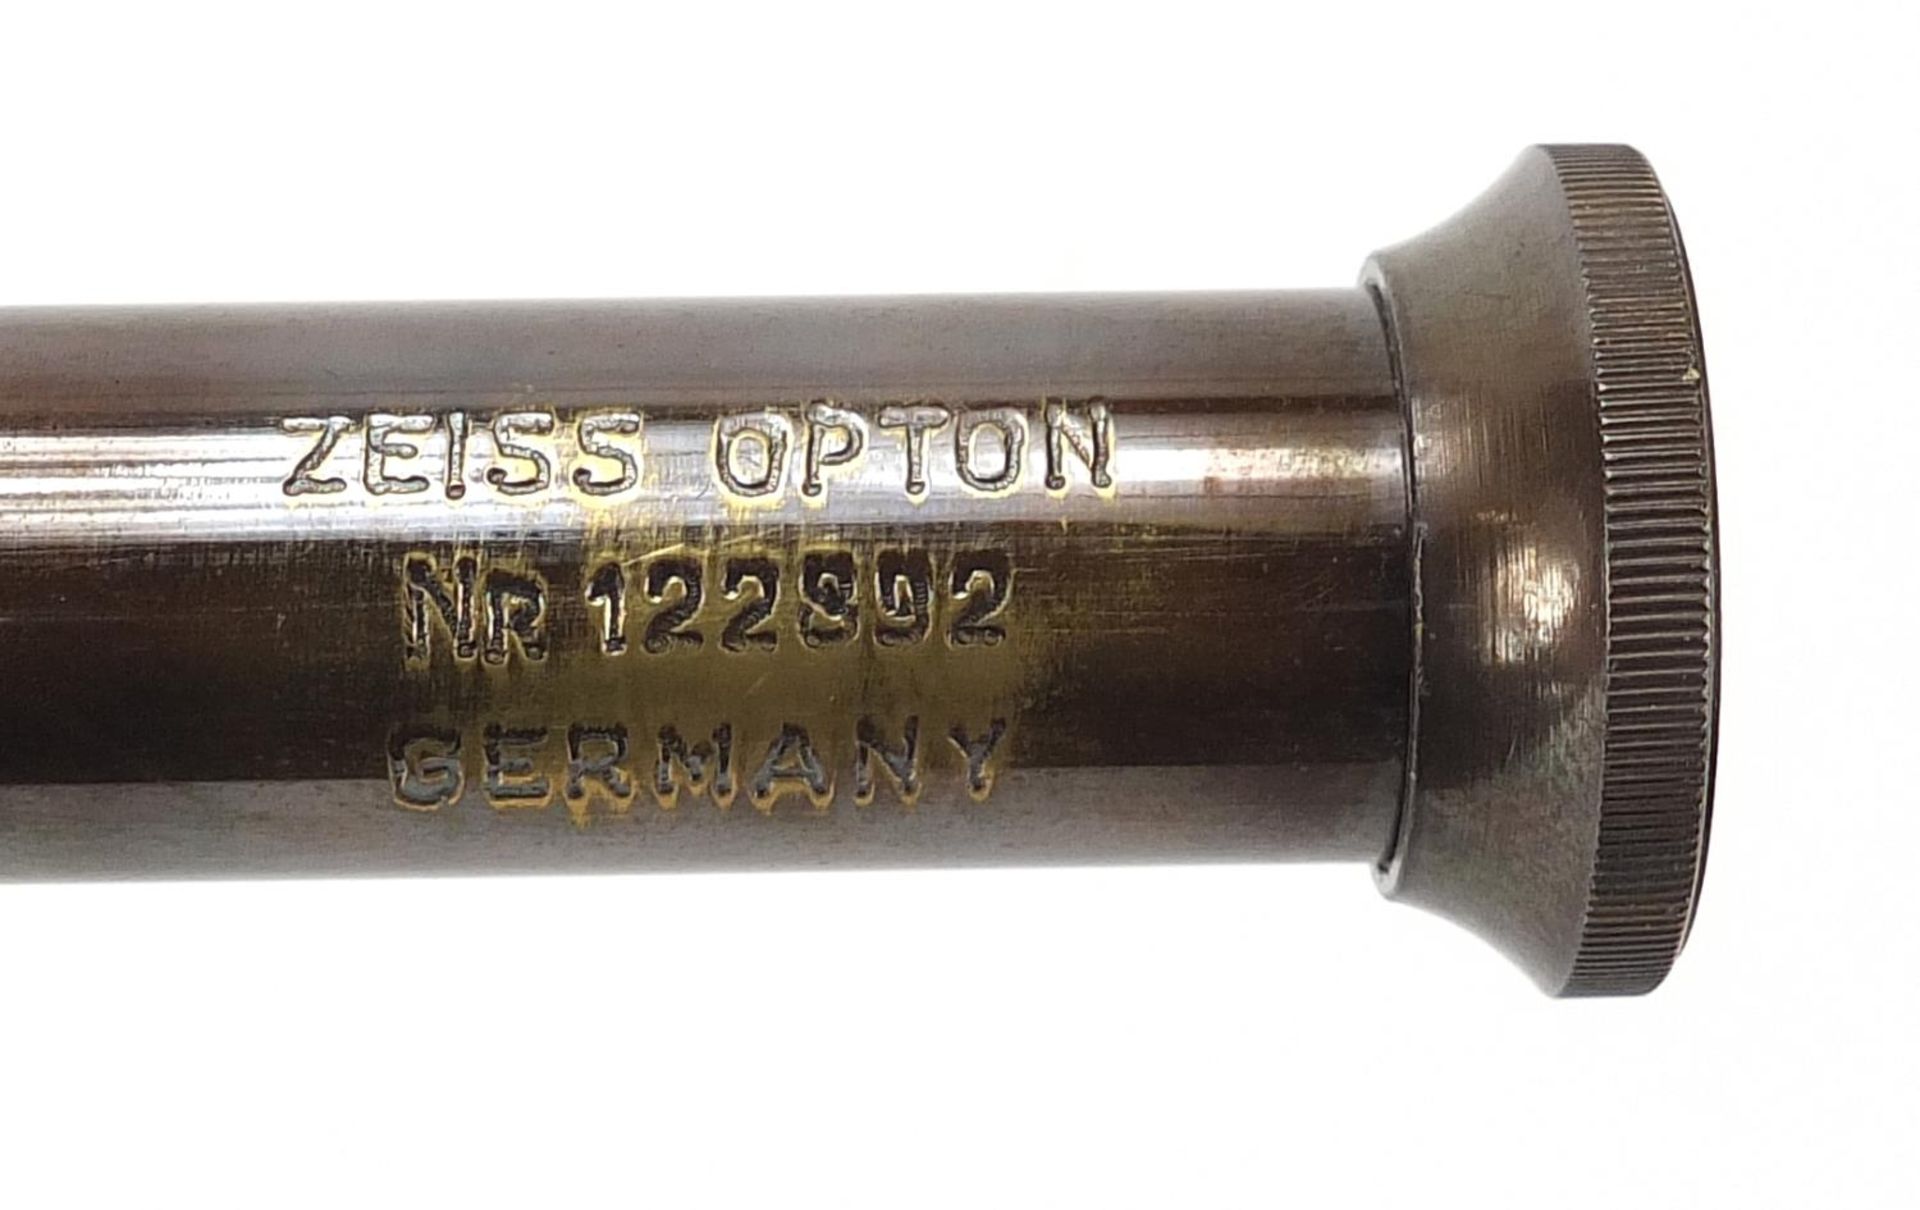 German military interest three draw brass telescope, 15cm in length when closed - Image 4 of 5